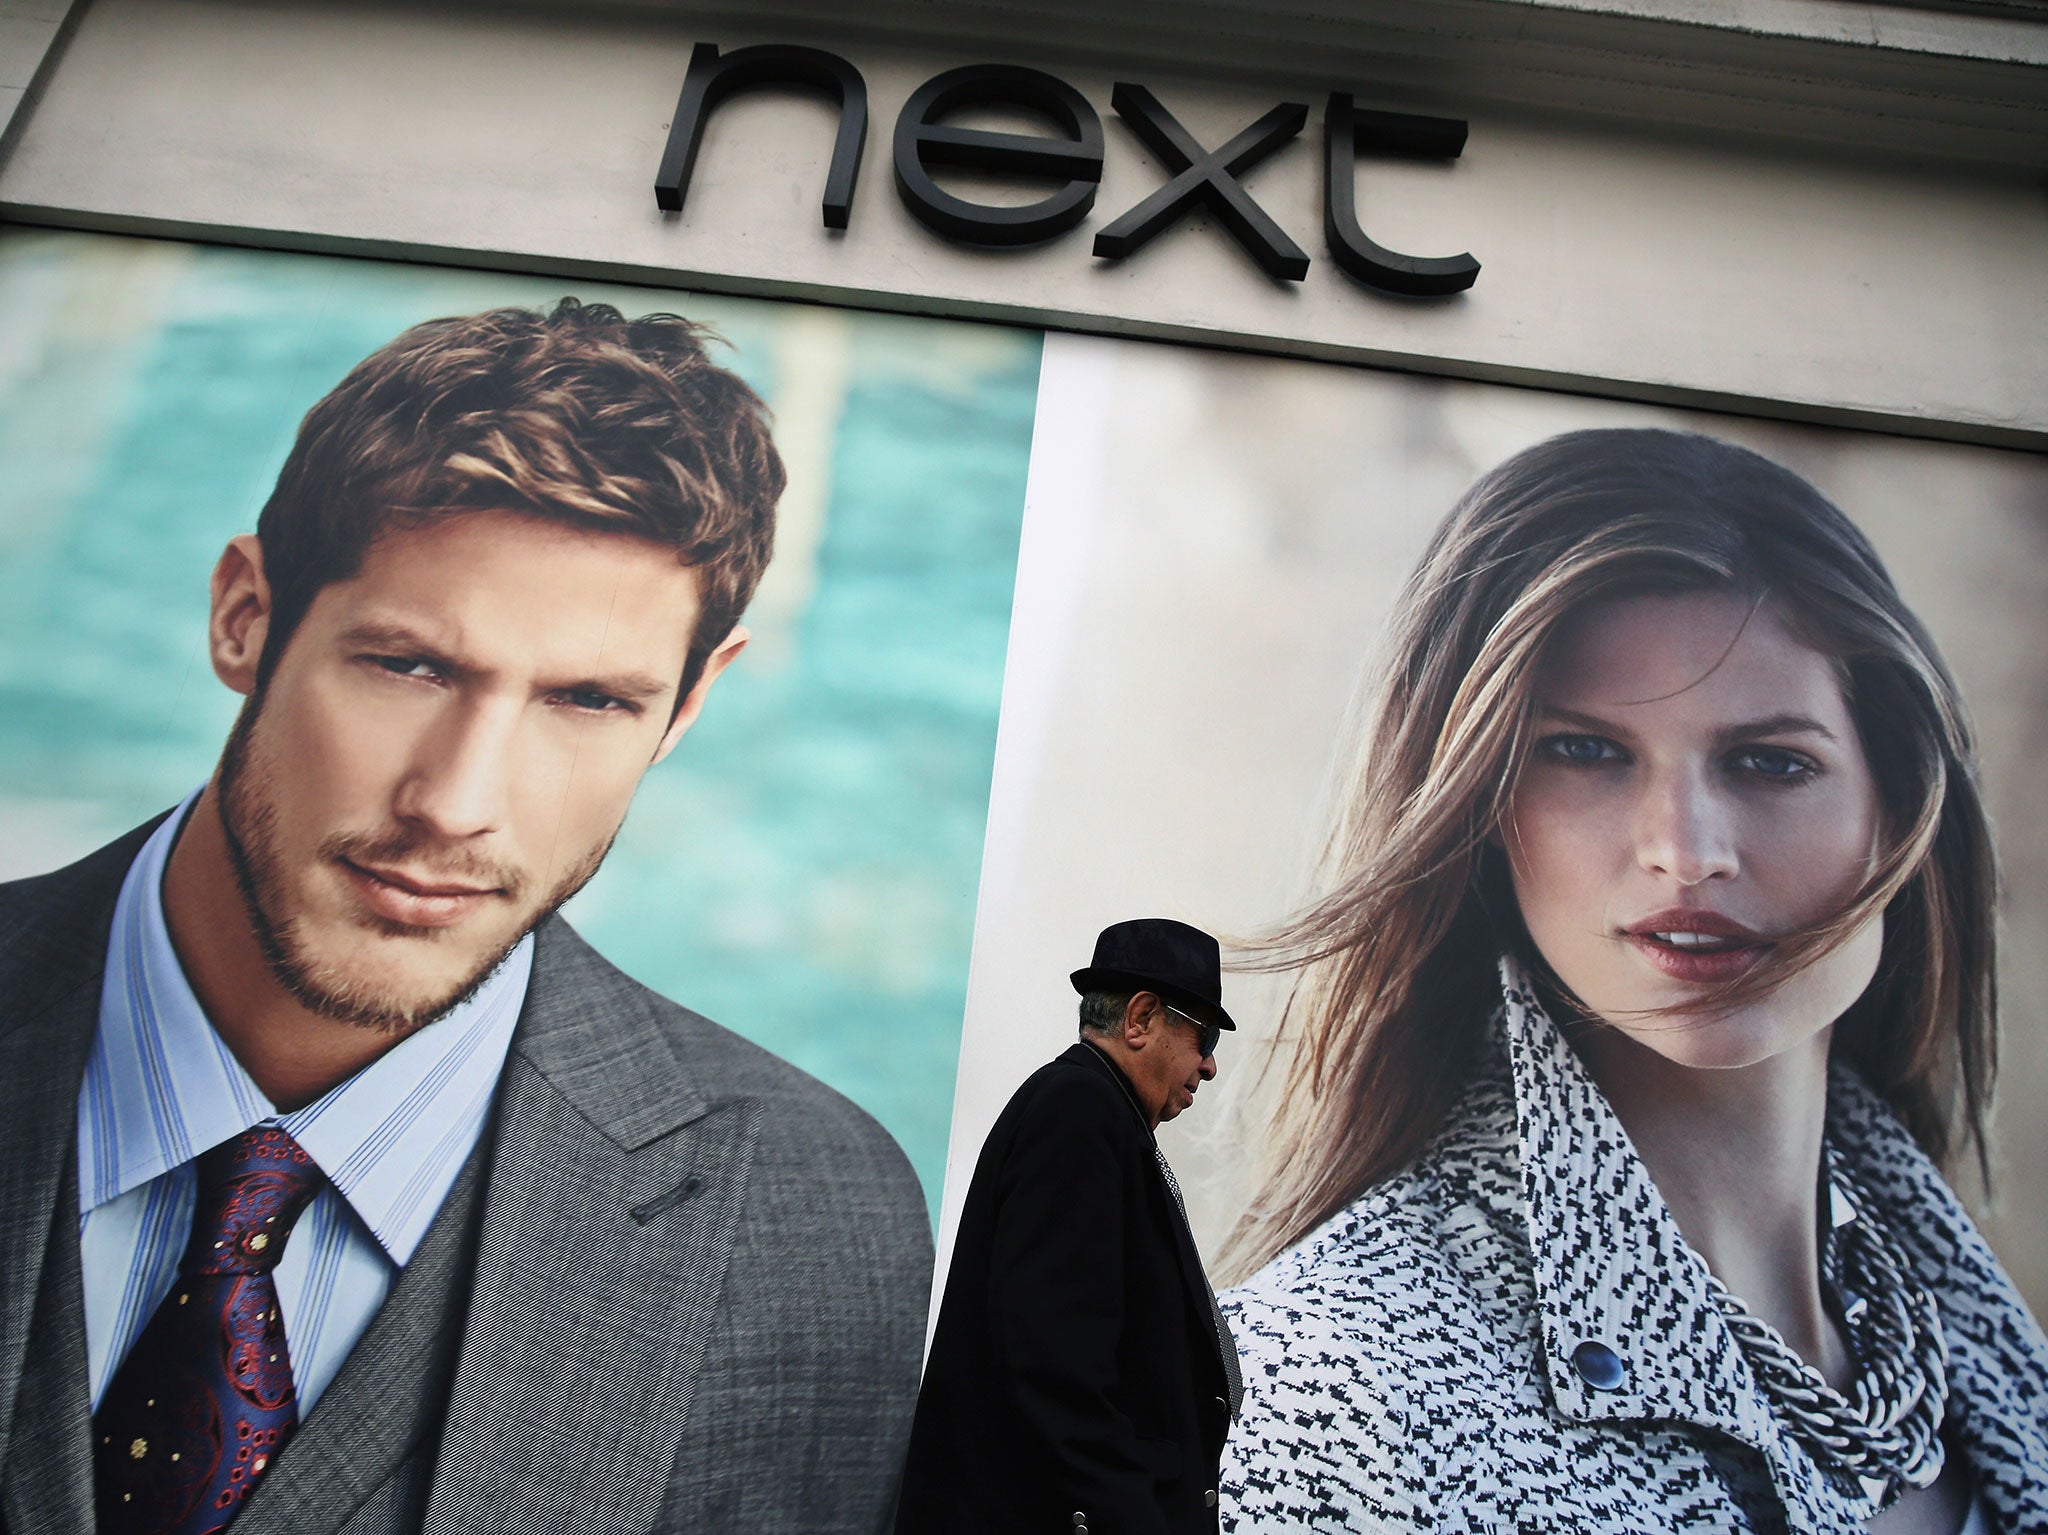 A man walks past a Next store on Oxford Street on June 3, 2014 in London, England.